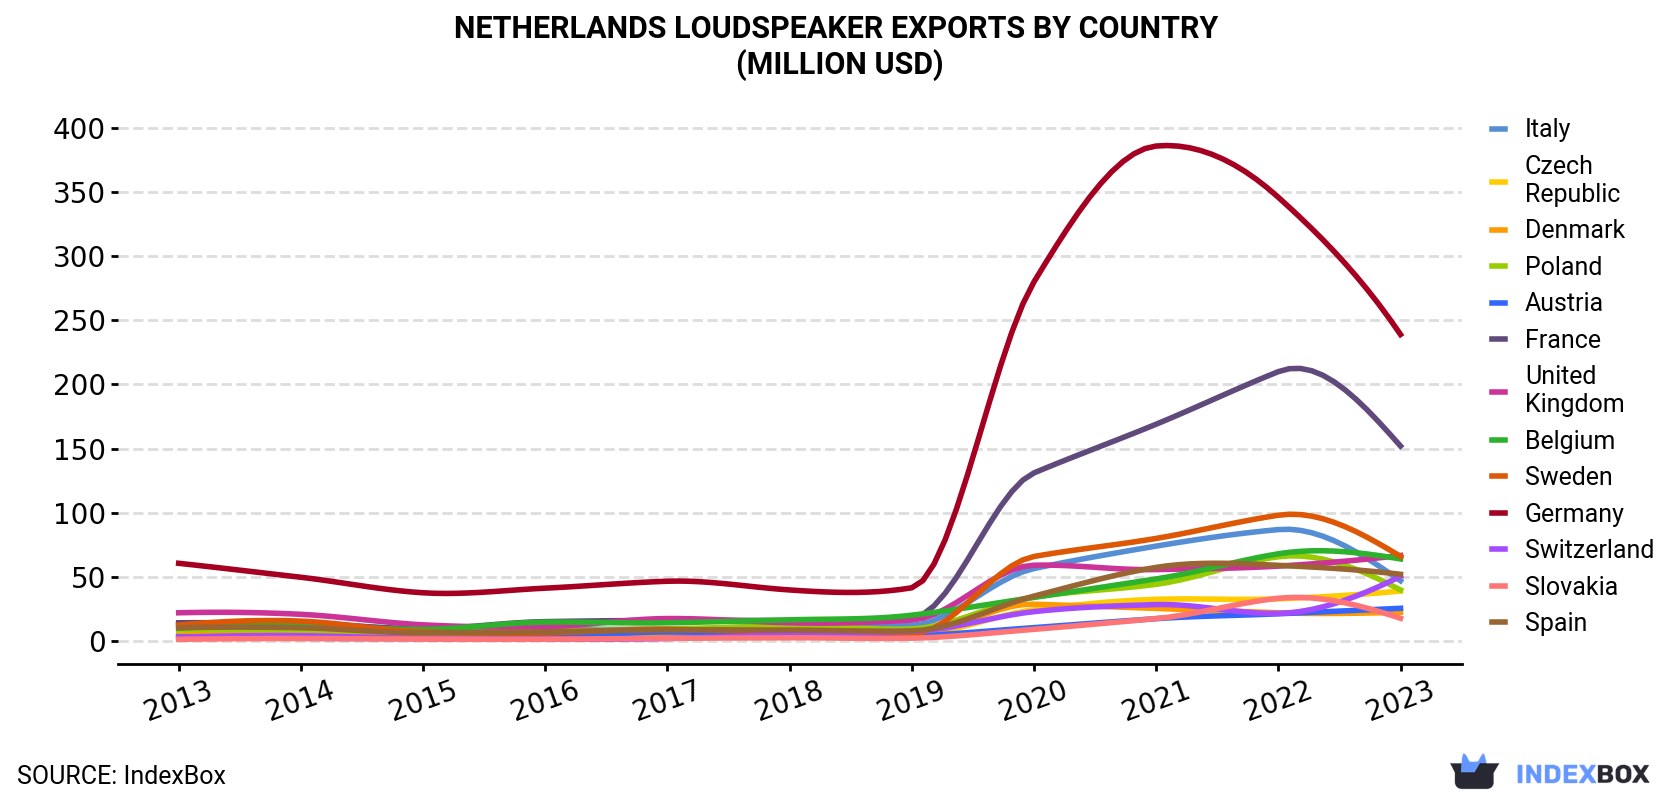 Netherlands Loudspeaker Exports By Country (Million USD)